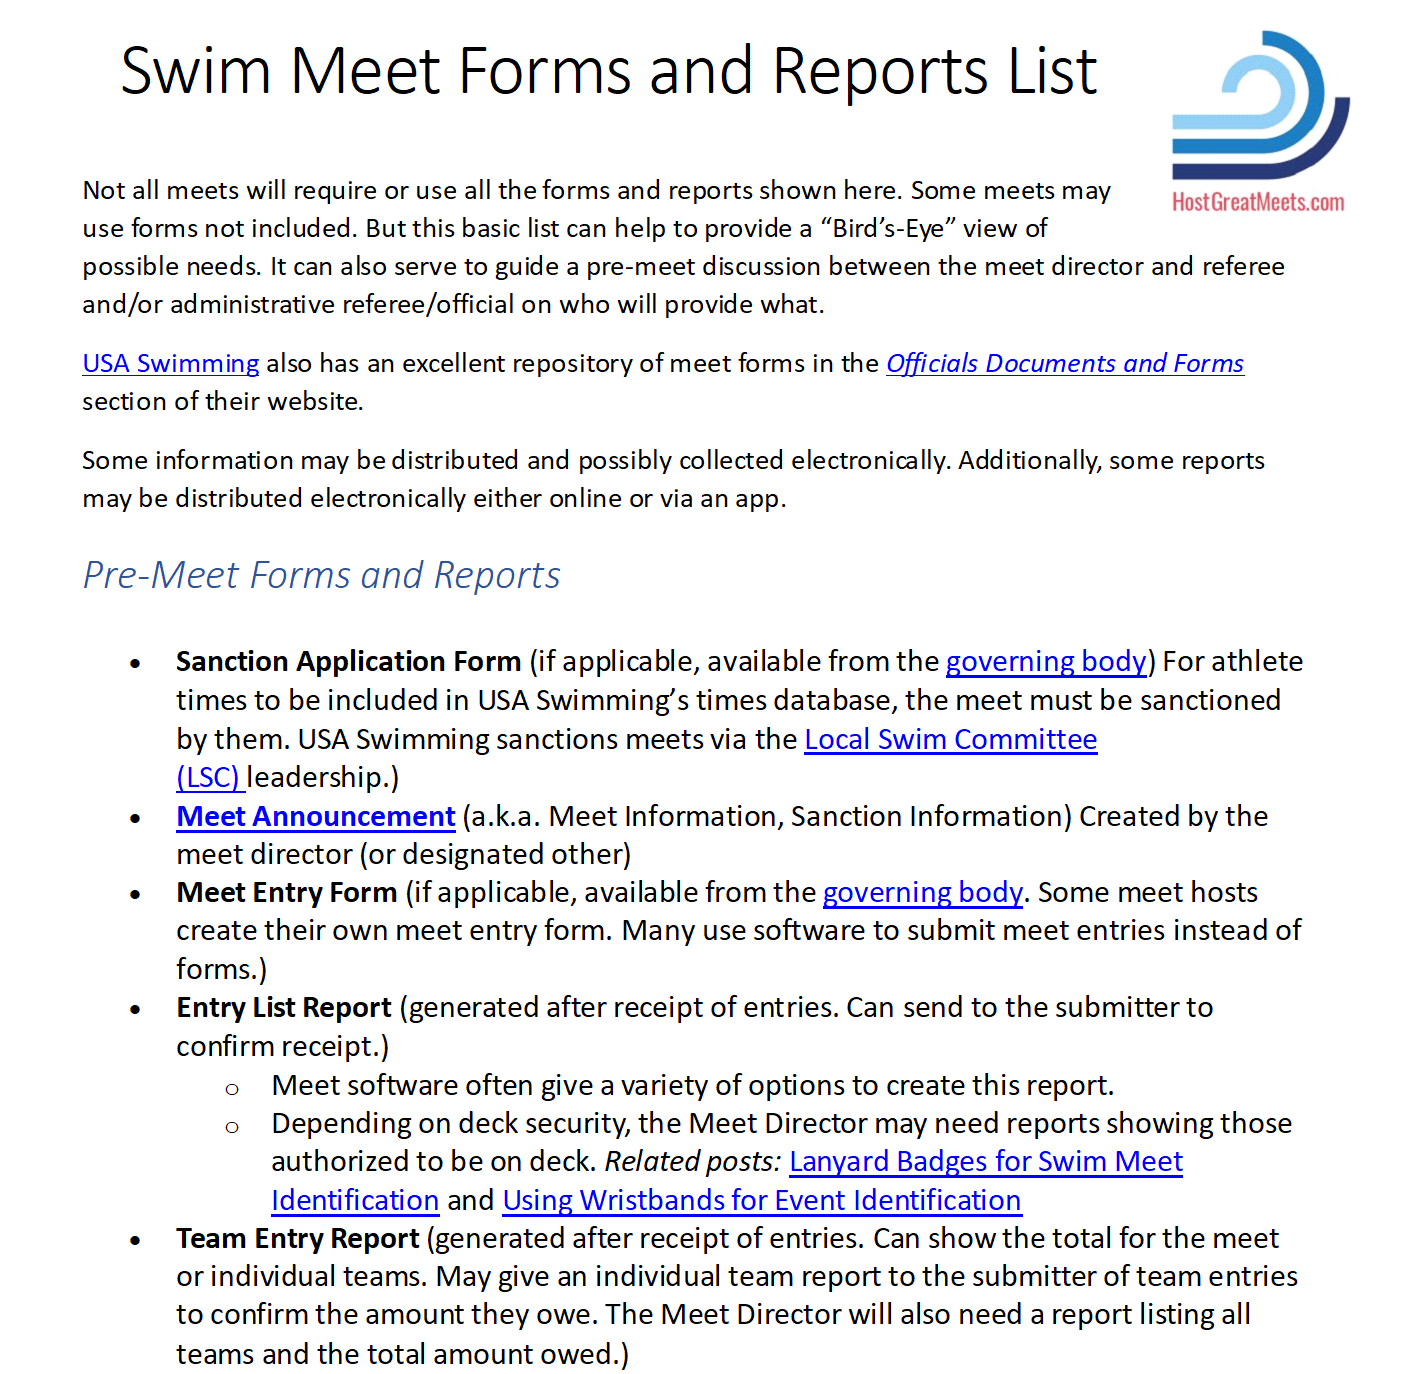 Swim Meet Forms and Reports List